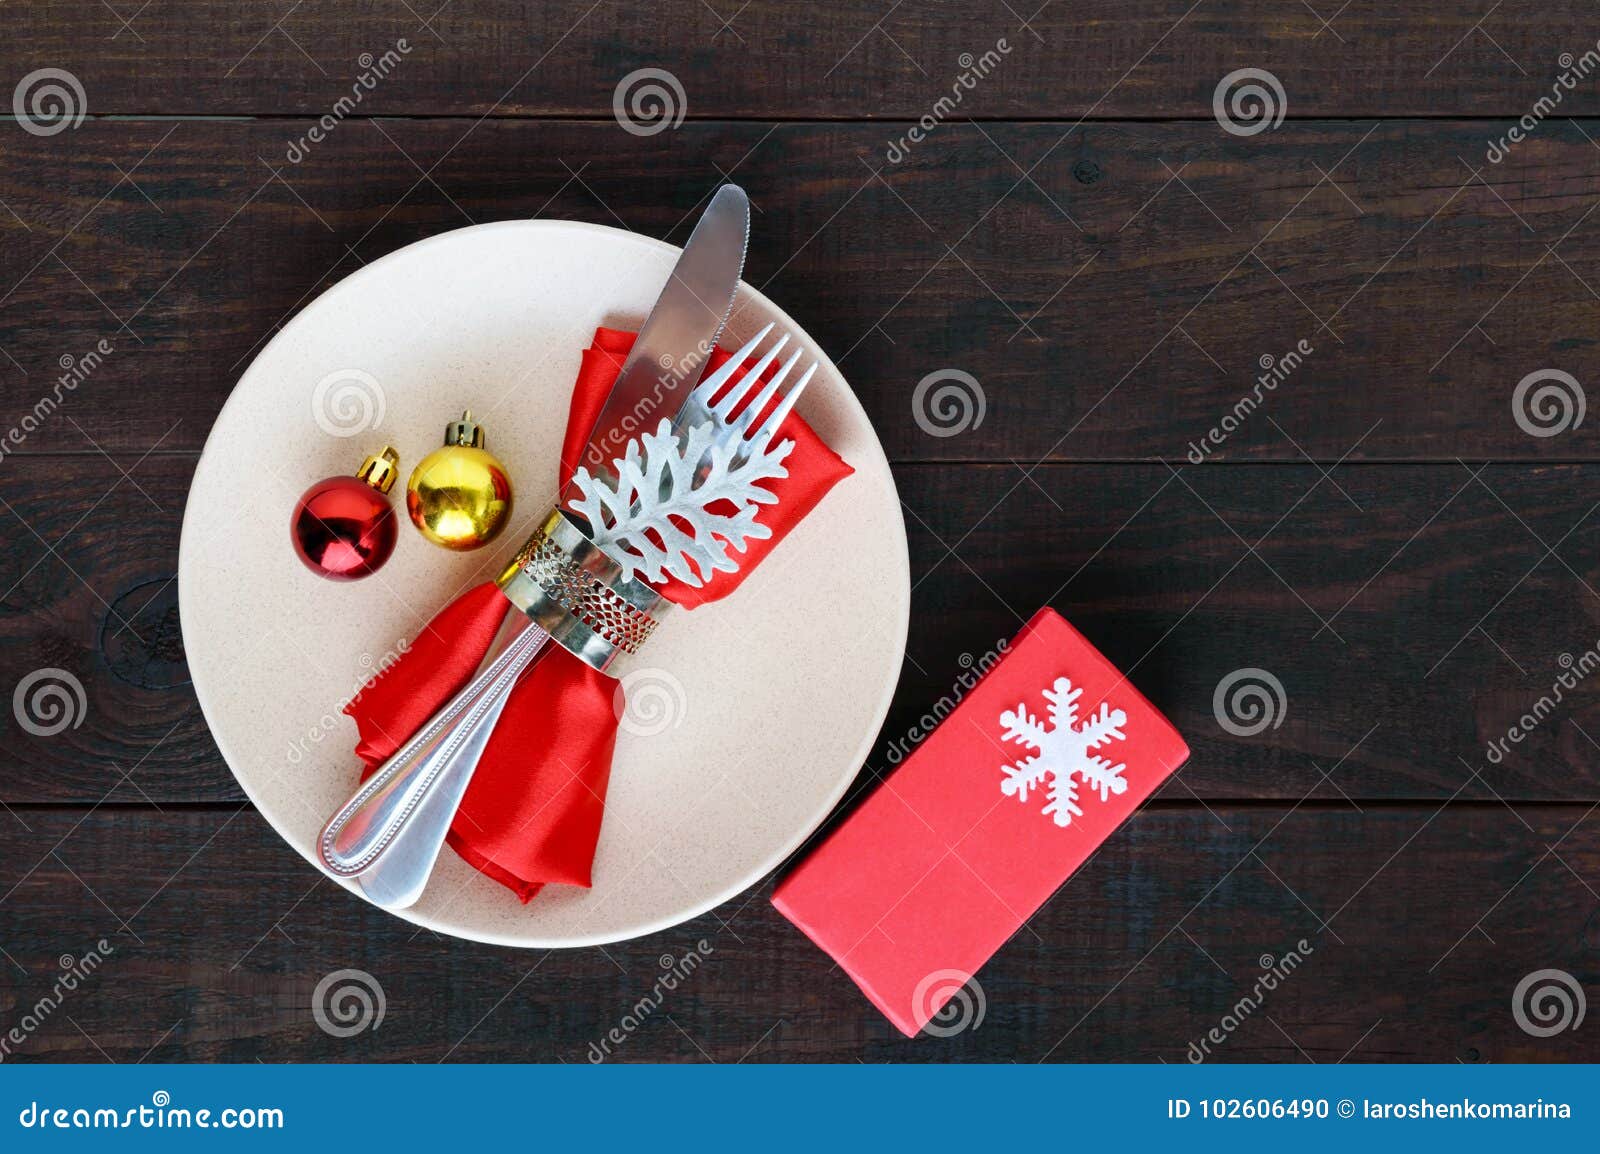 Christmas Table Decoration. Christmas Dinner Plate, Cutlery Decorated ...